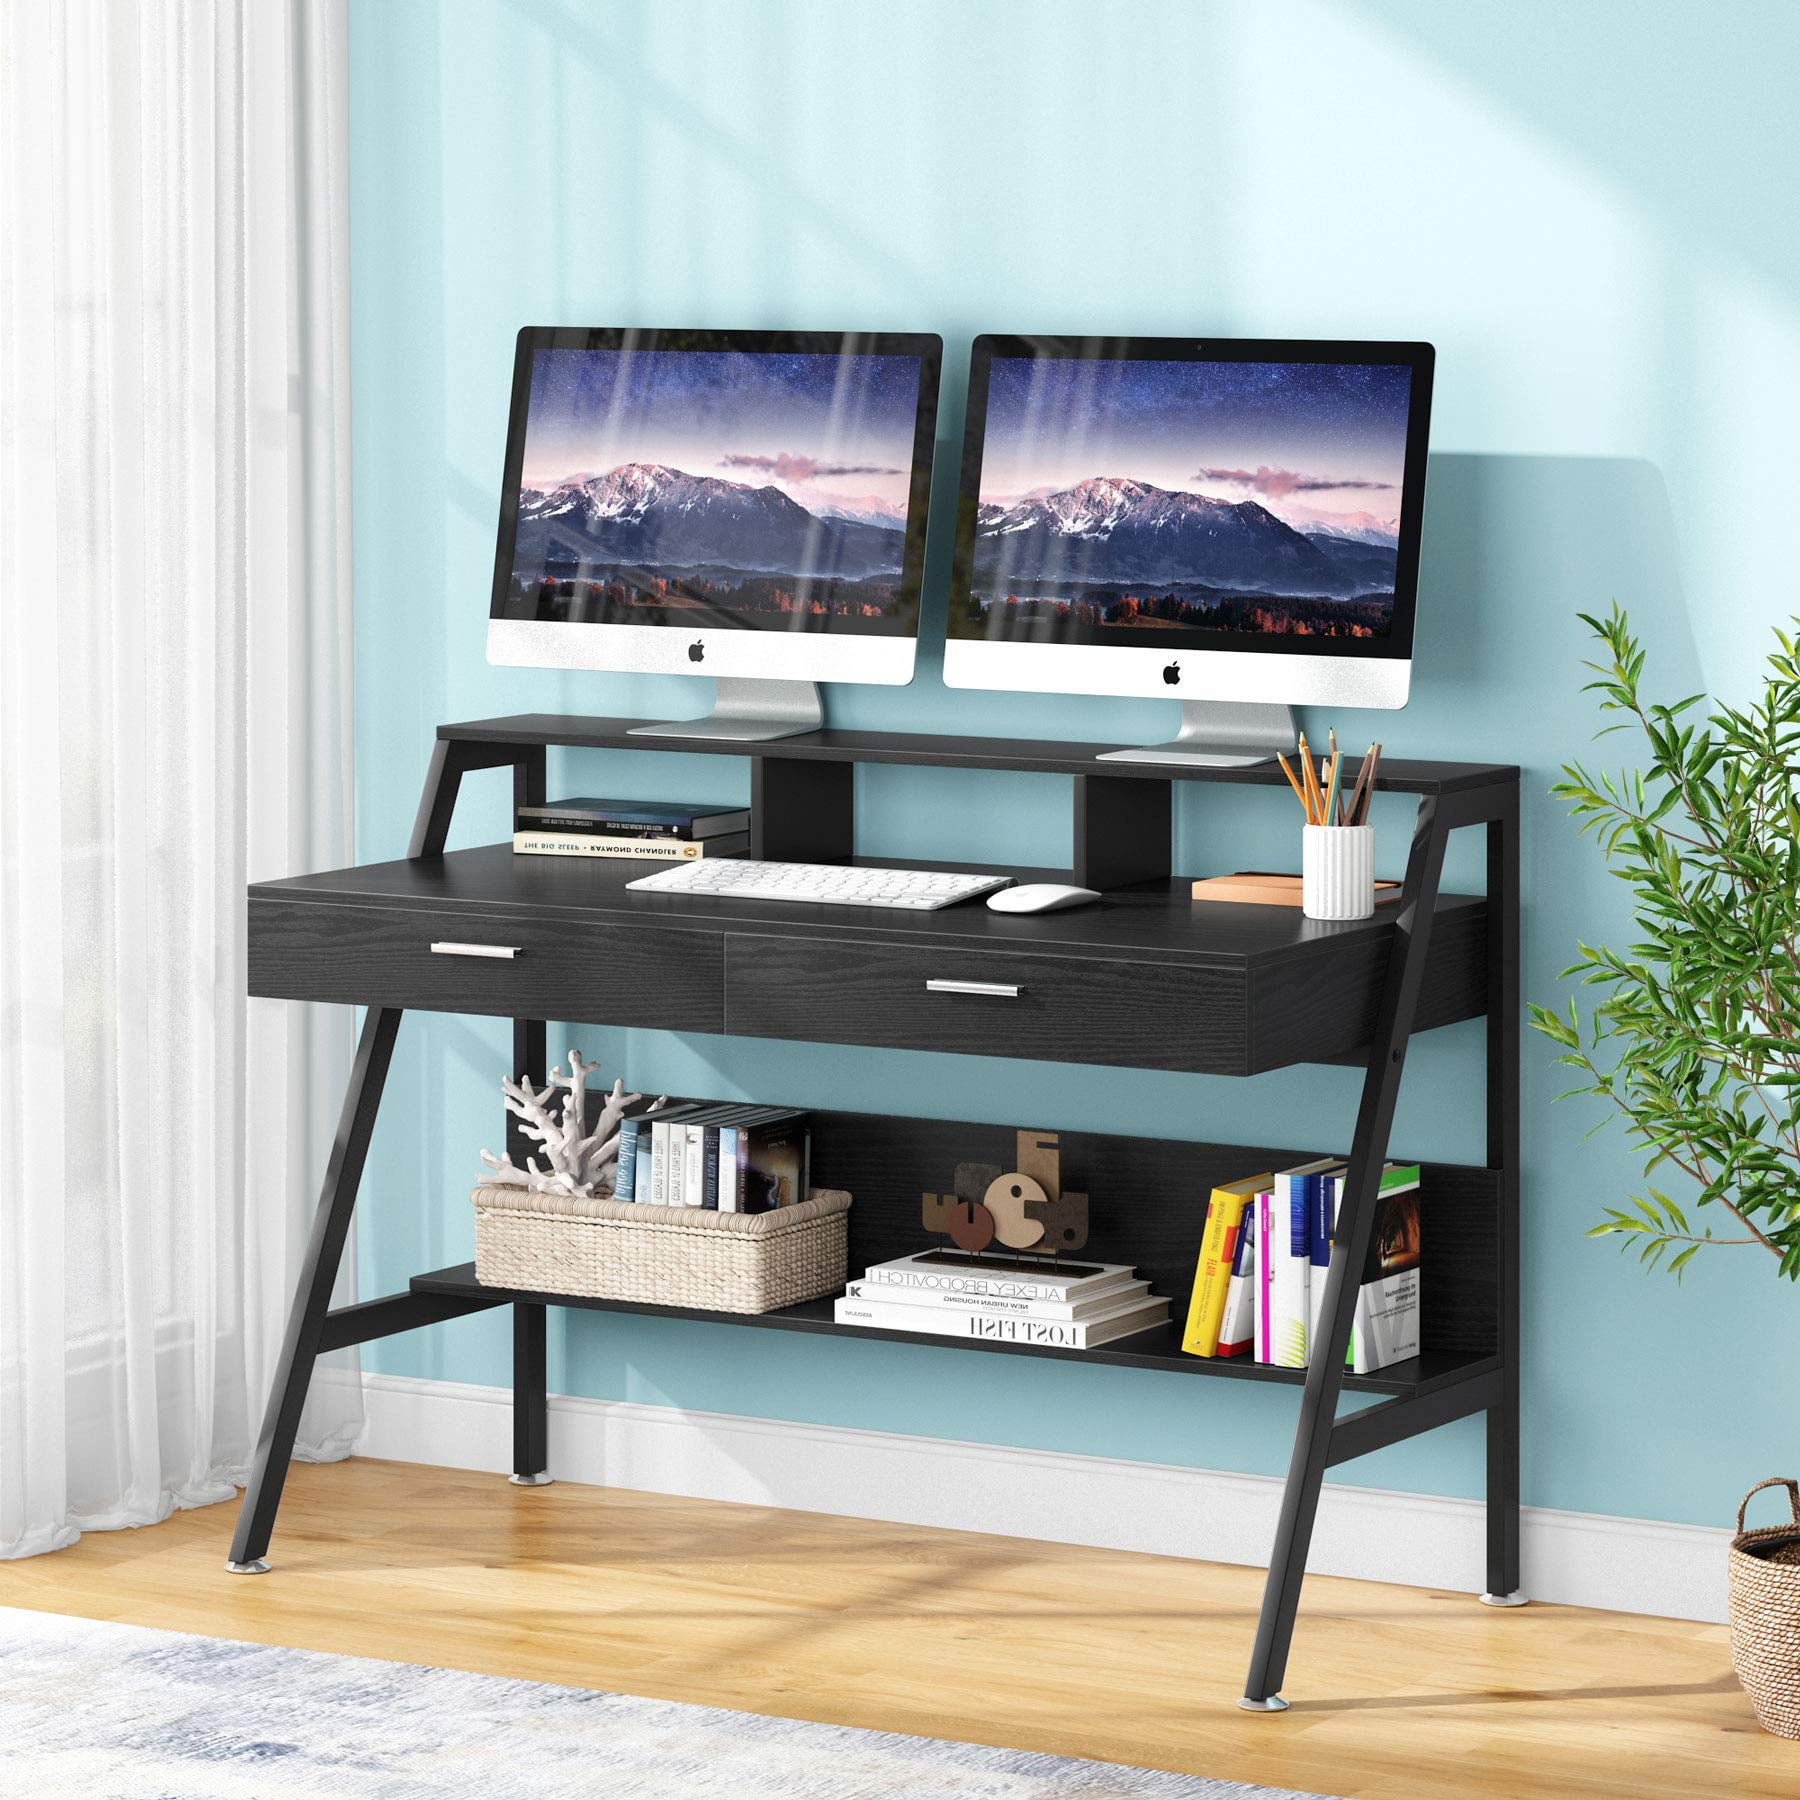 ergonomic What Size Computer Desk For 2 Monitors for Small Room